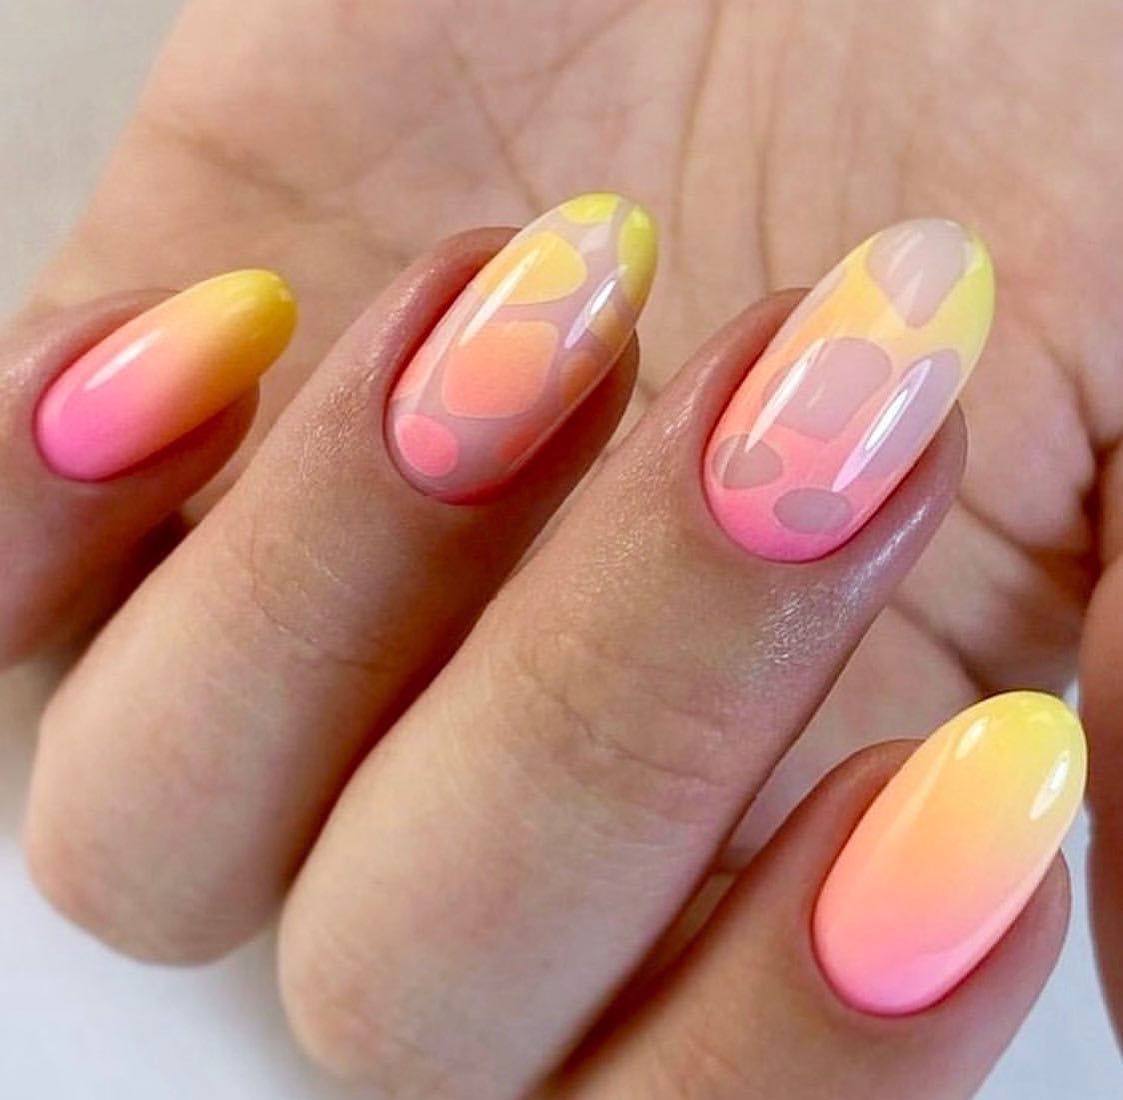 Do you like colorful and bright nails? If so, this broken-up mani is the one for you!